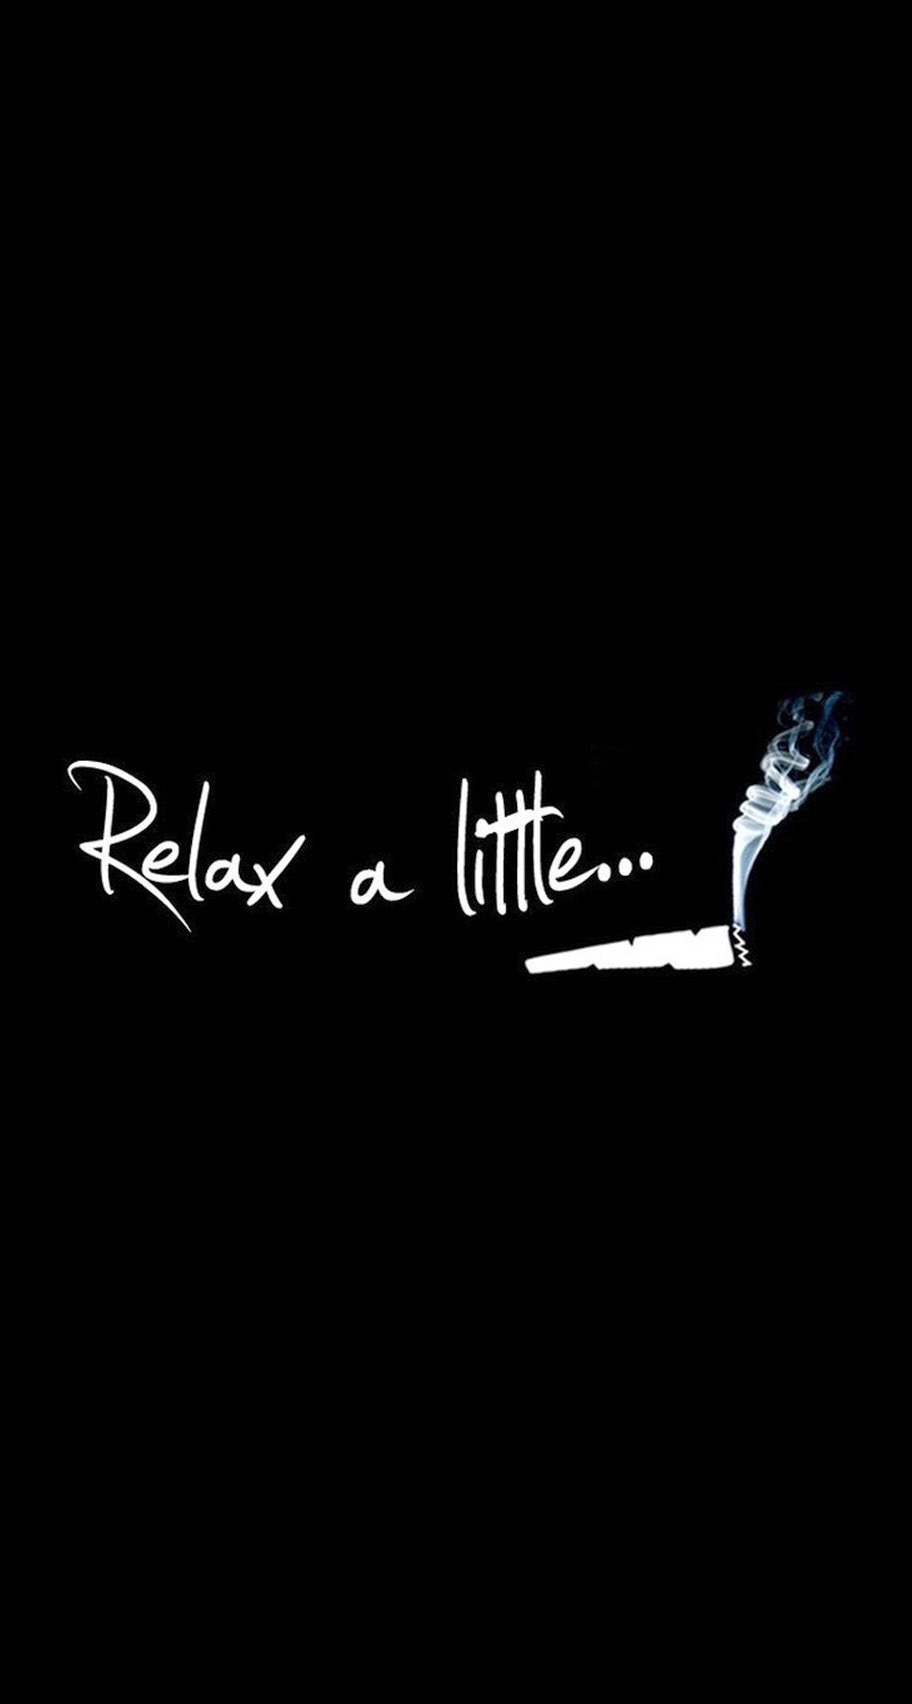 Relax A Little Smoke Weed iPhone Plus HD Wallpaper